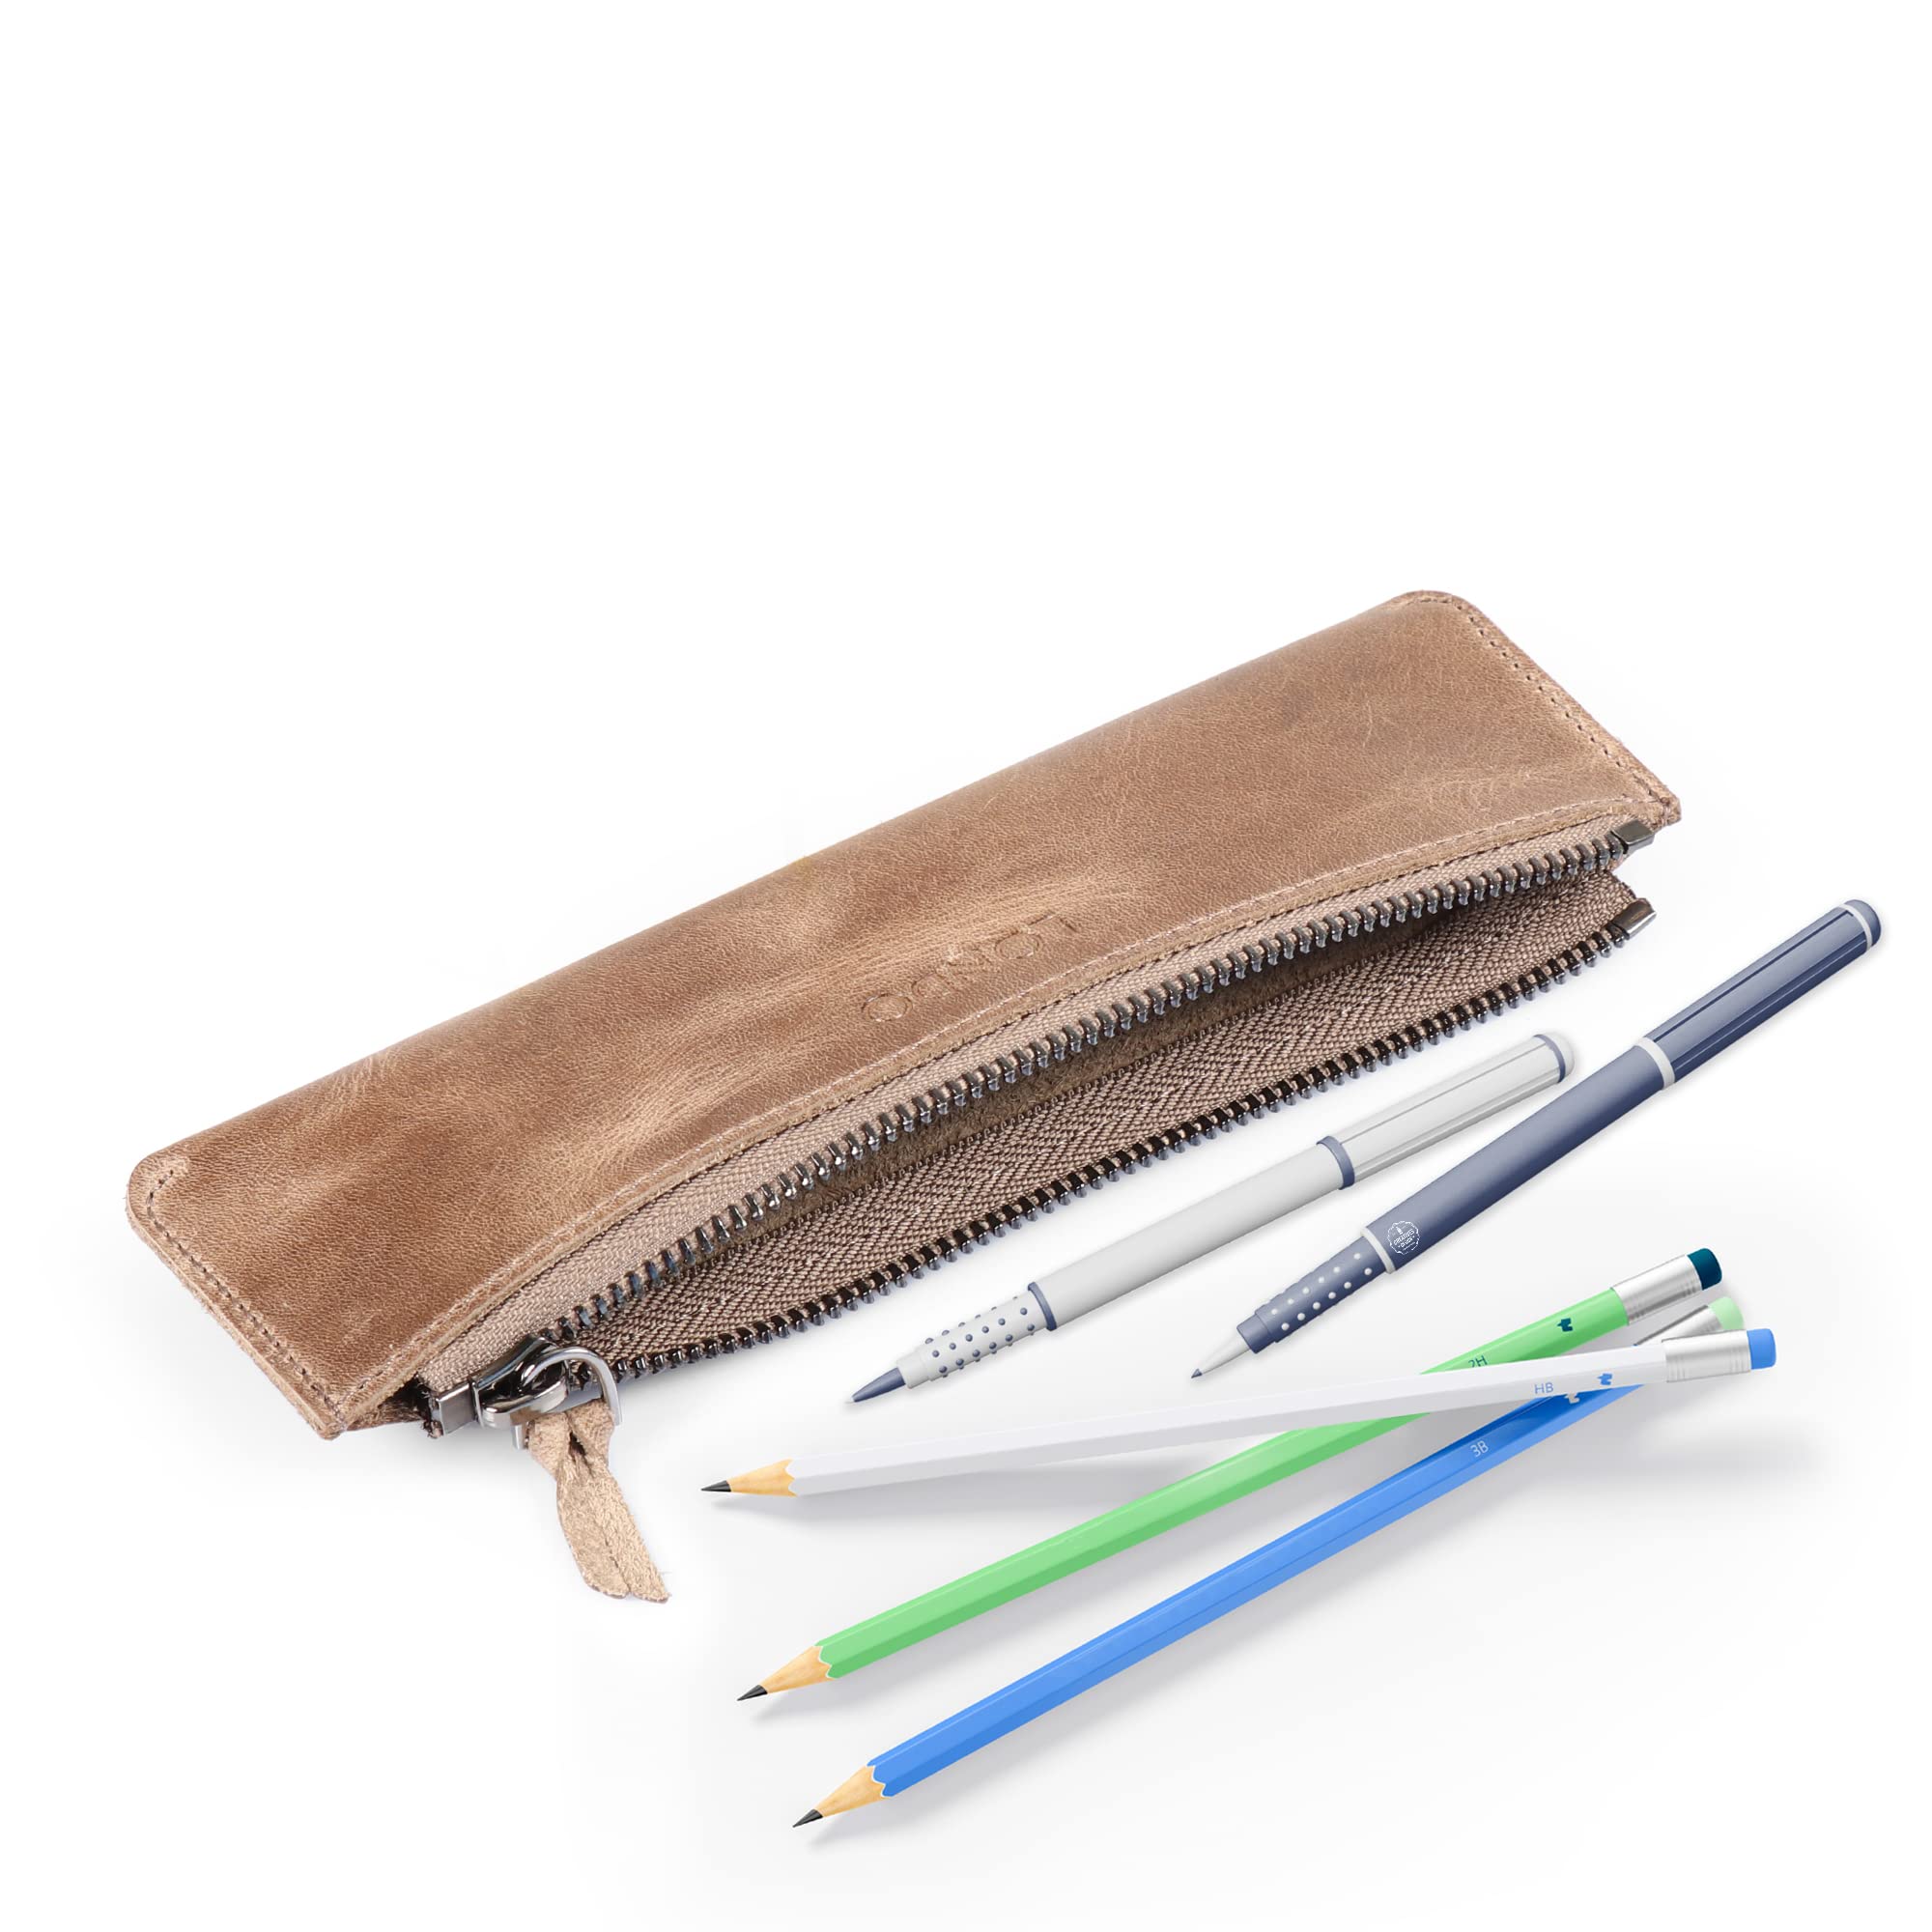 Londo Genuine Leather Pen Case with Zipper Closure, Pencil Pouch Stationery Bag (Mink)